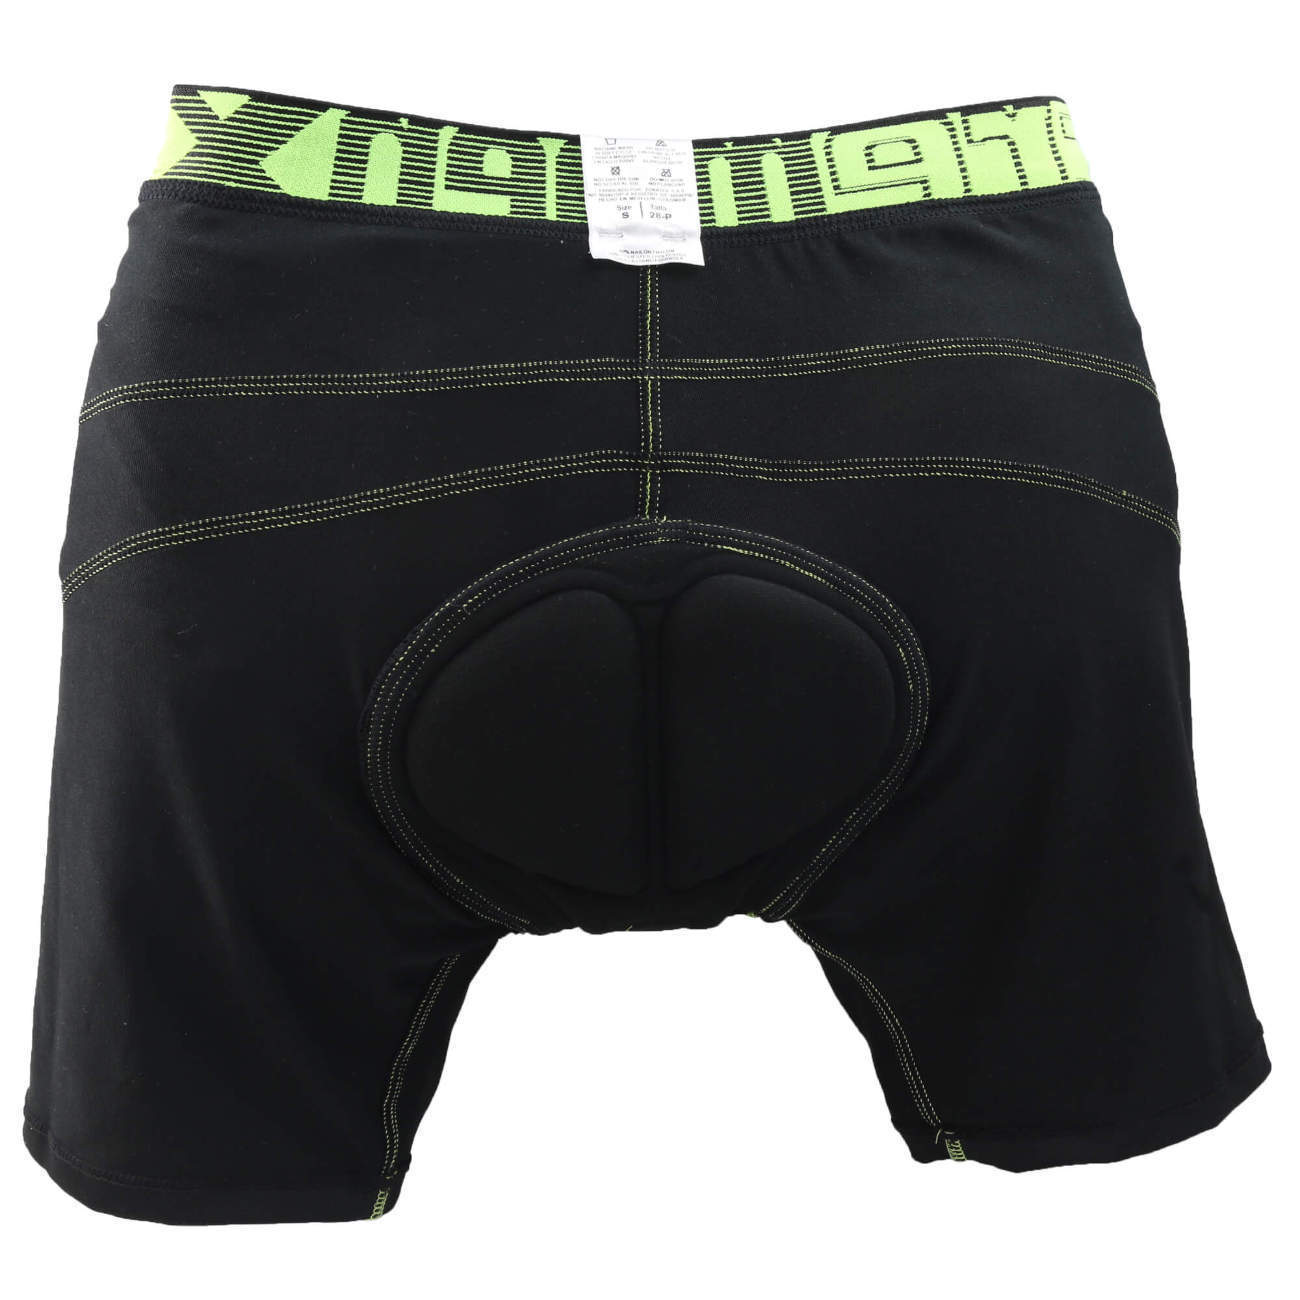 Xtremen 51371 Cycling Padded Boxer Briefs